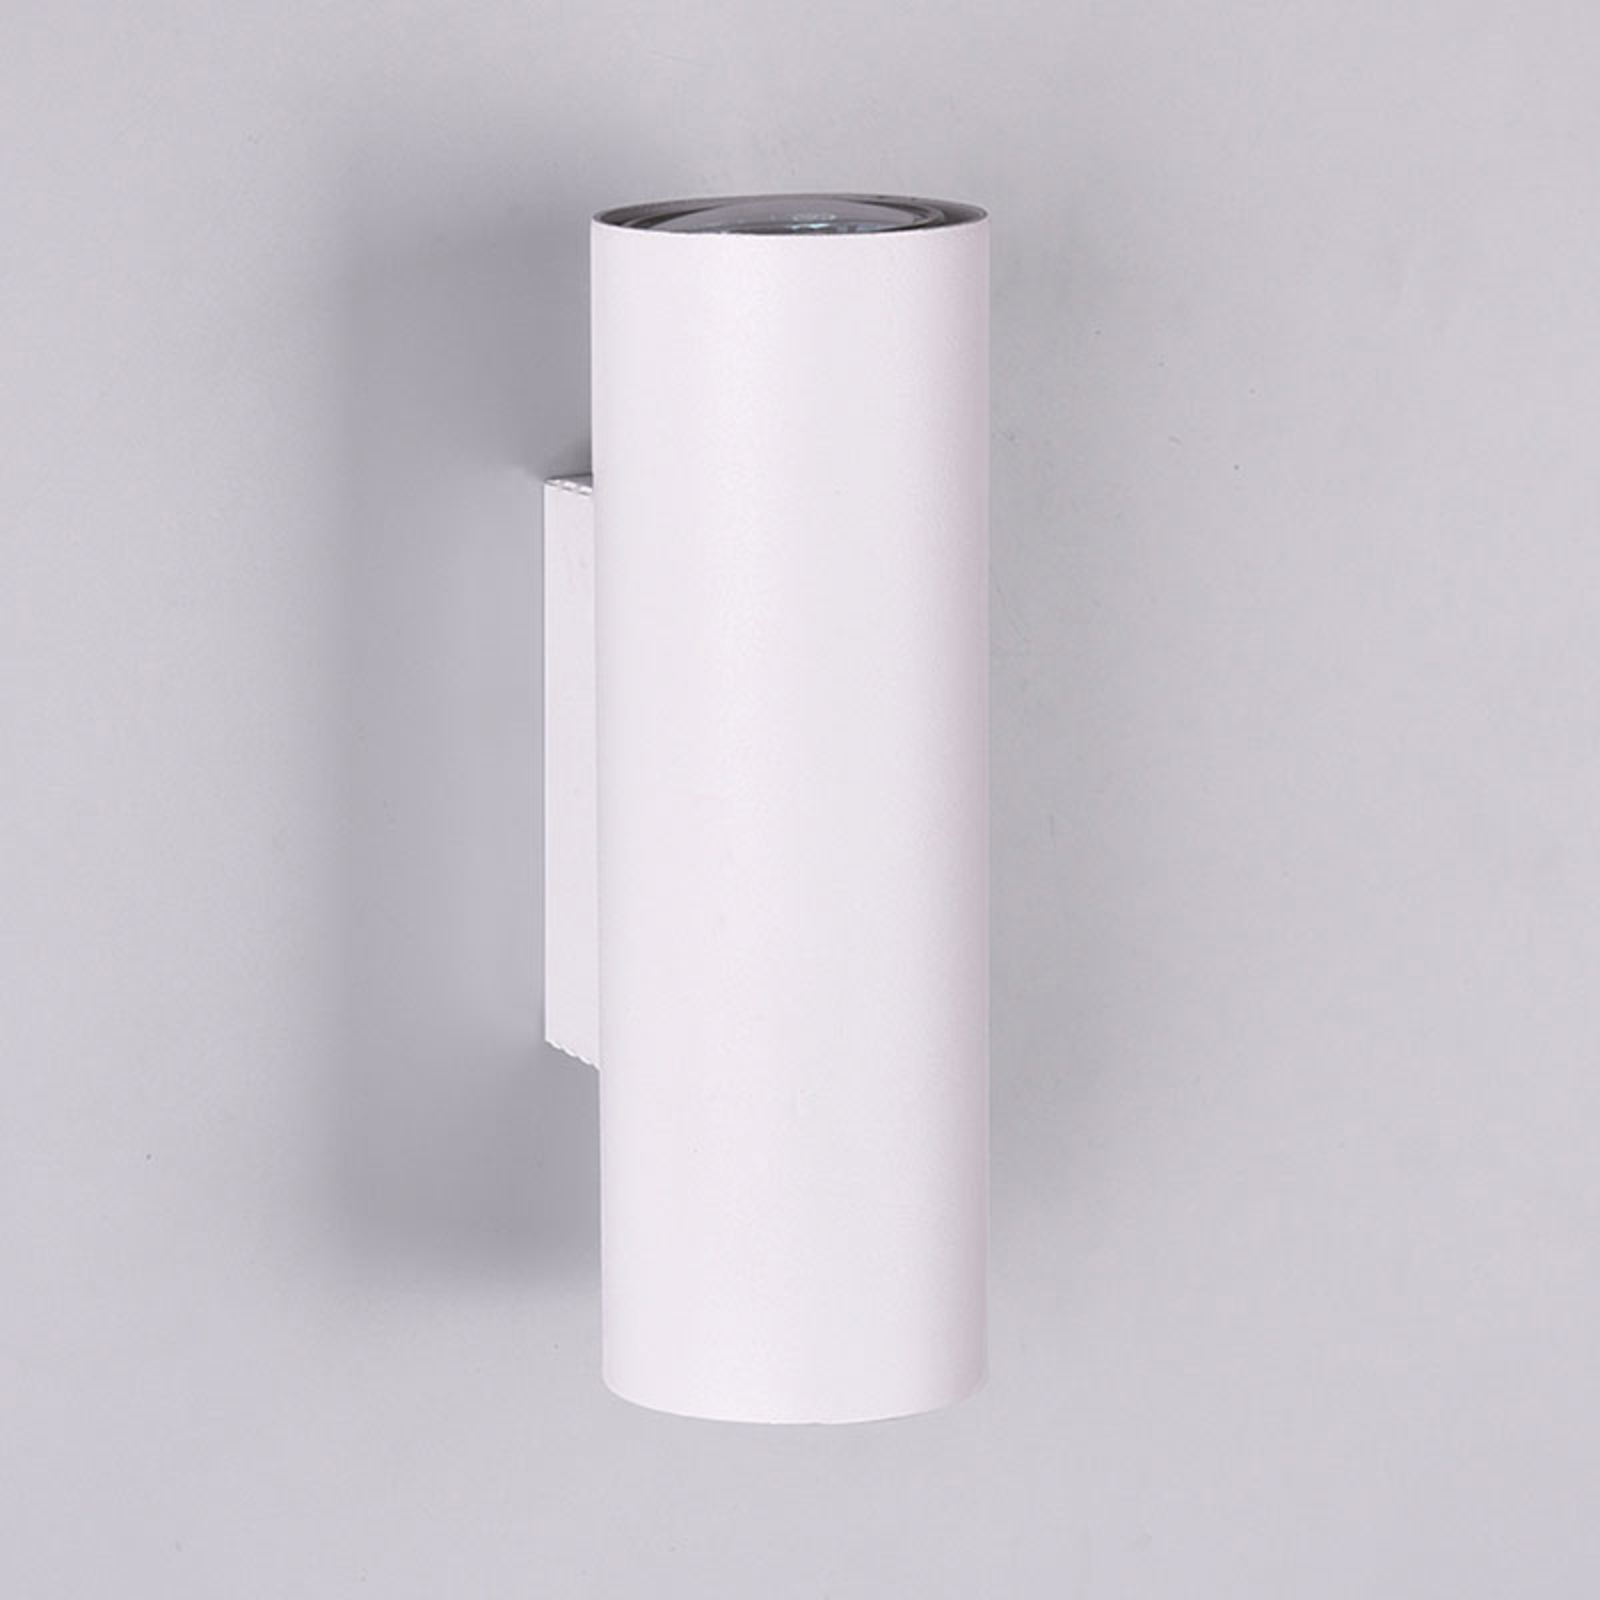 Marley wall light in white